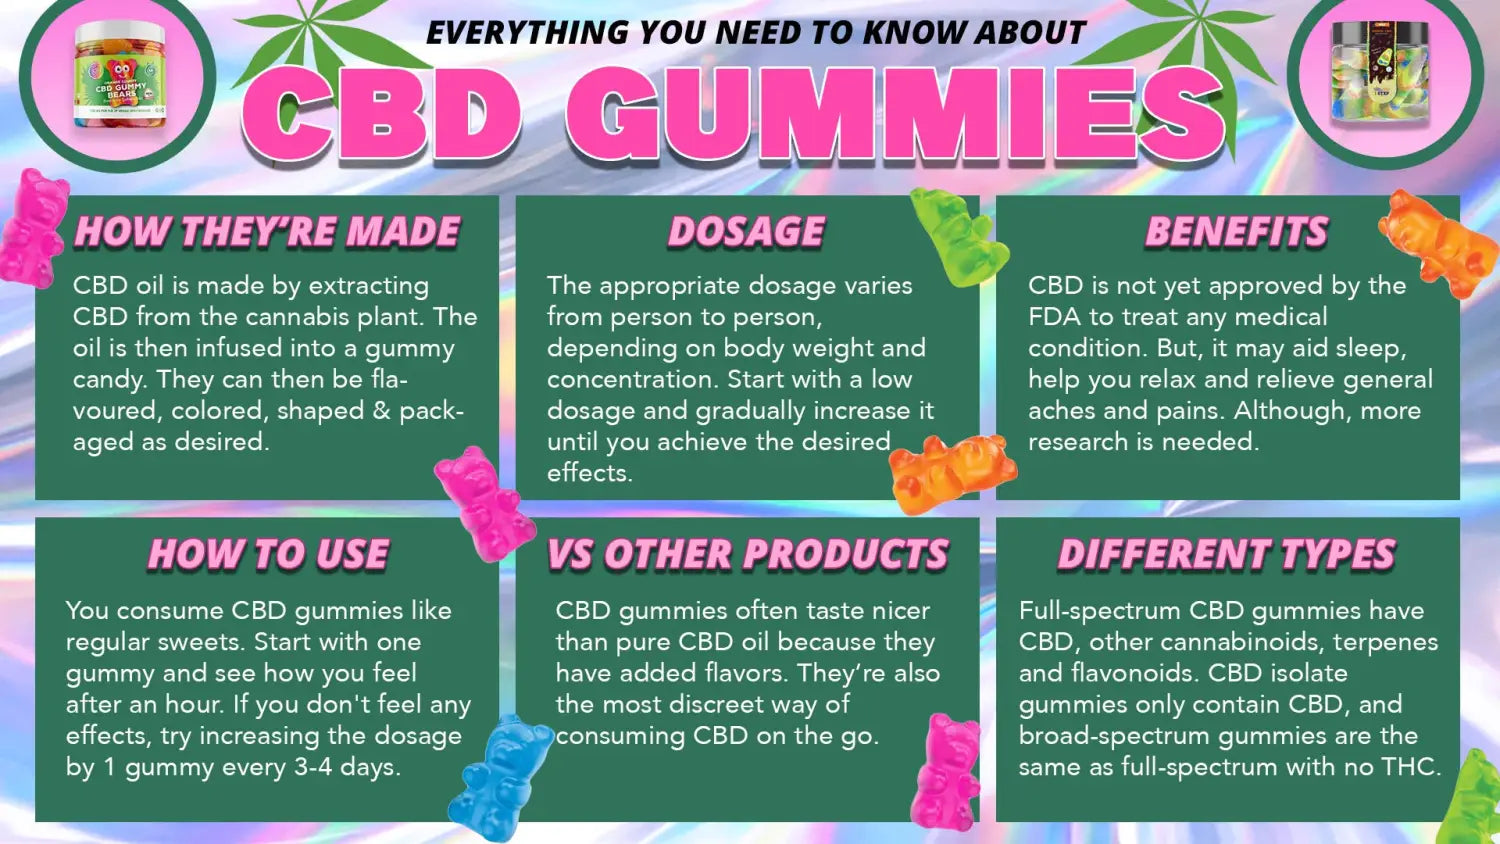 10 Things To Look For When Purchasing CBD Gummies